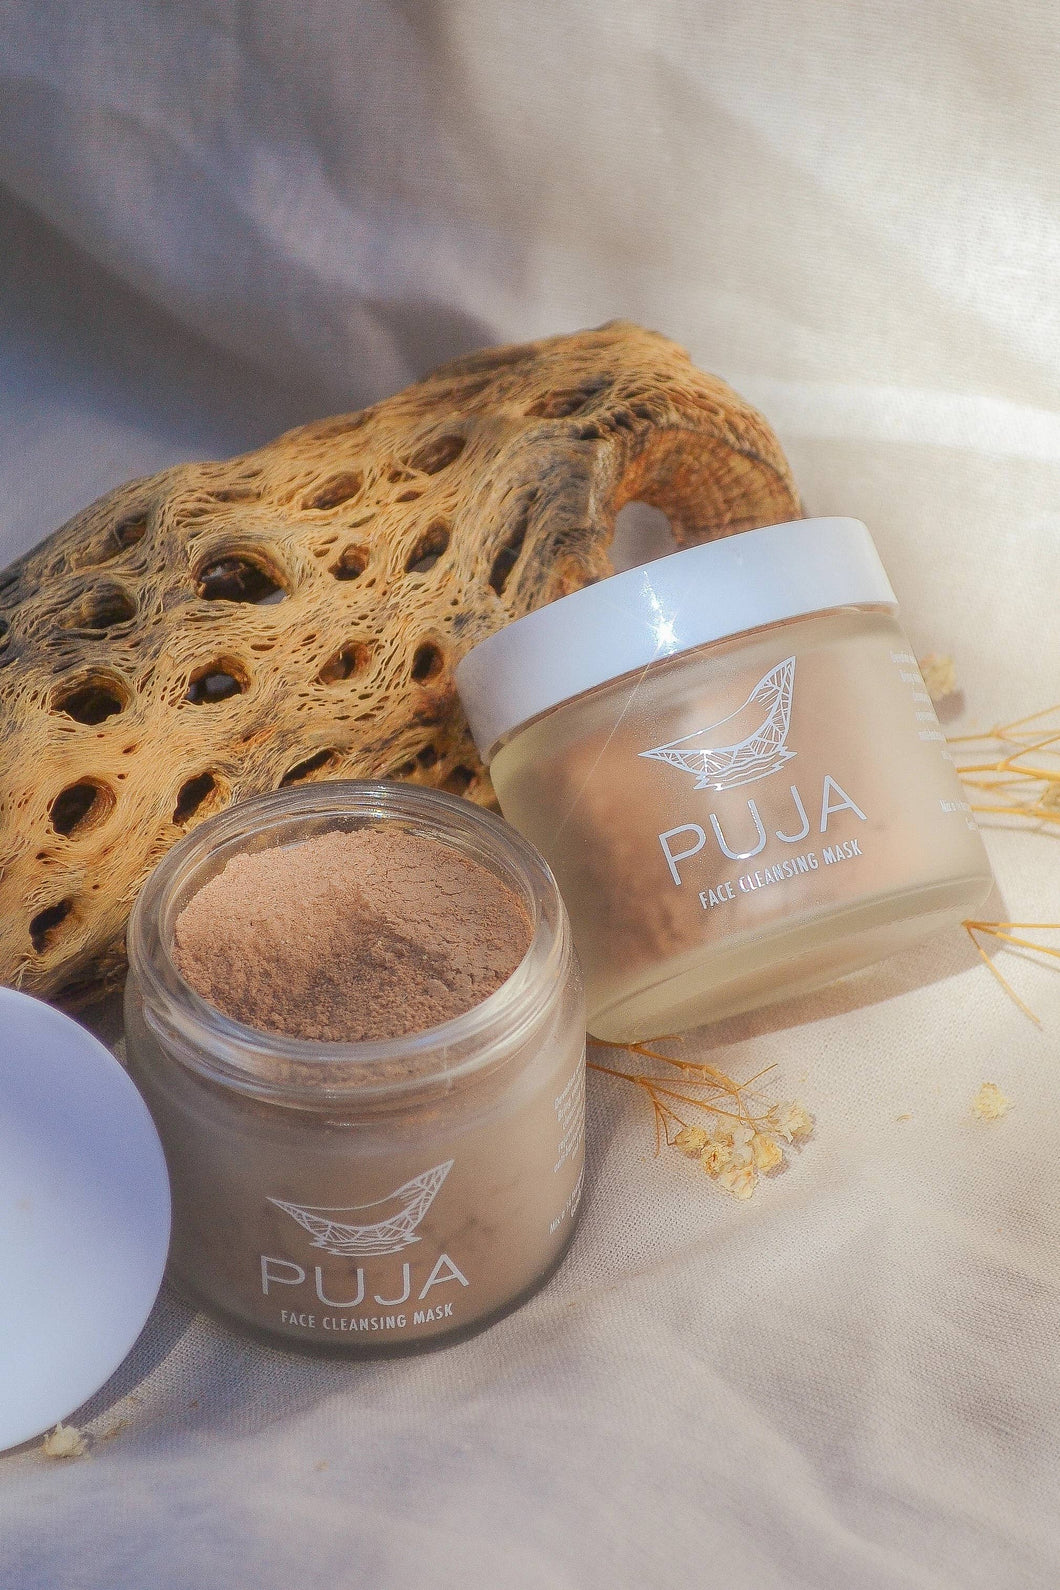 Puja Daily Face Cleanser